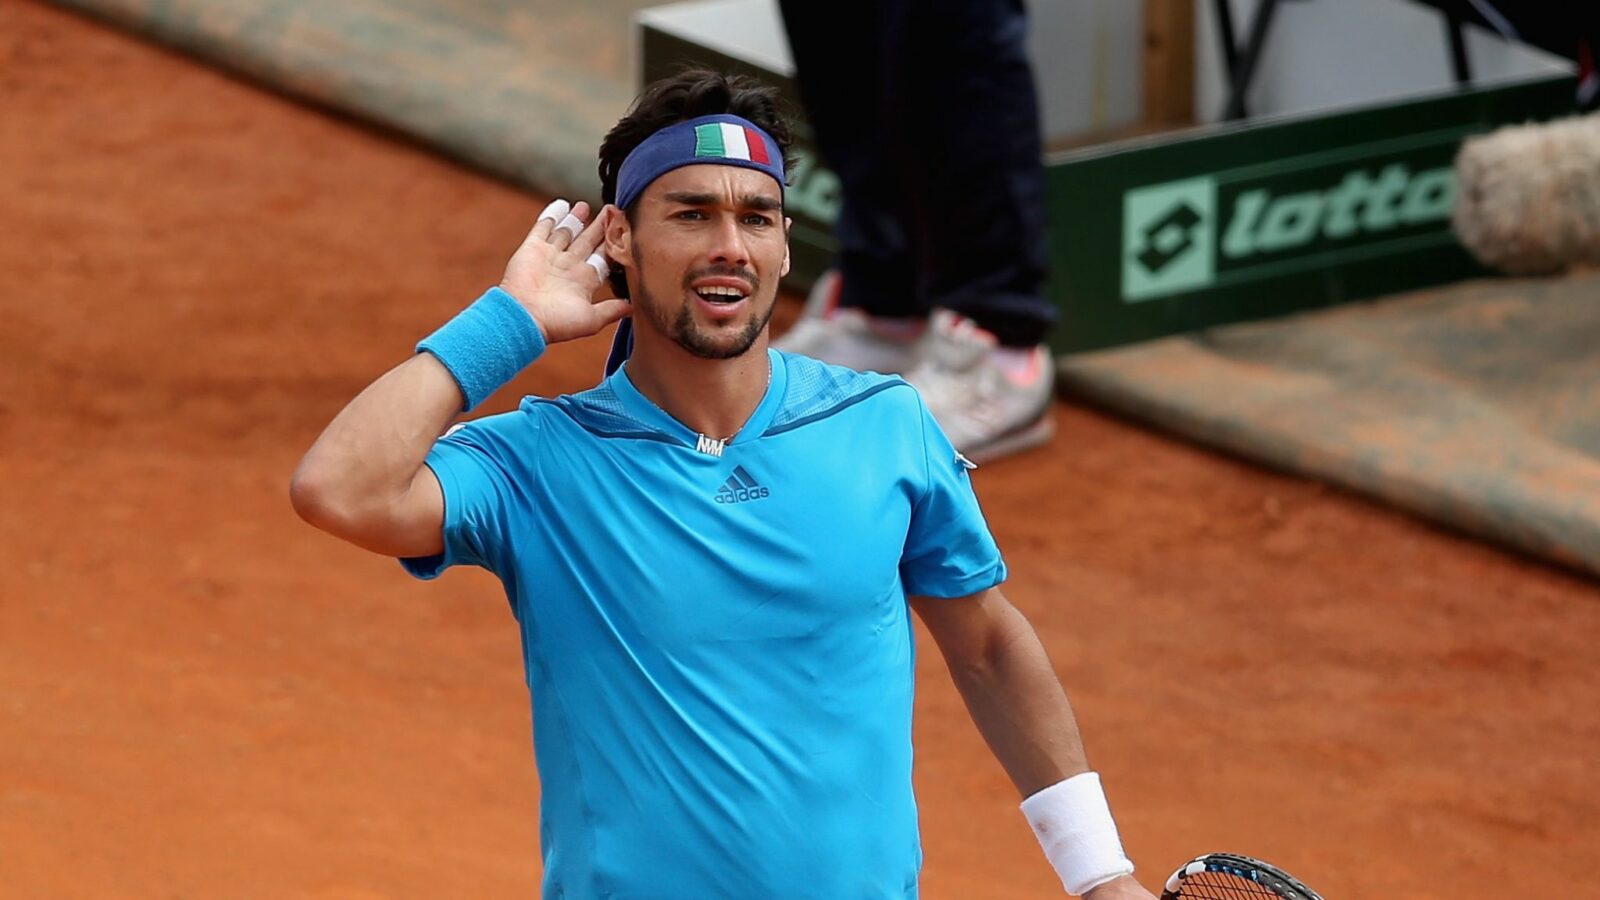 I want an apology from ATP, says Fabio Fognini - On Court